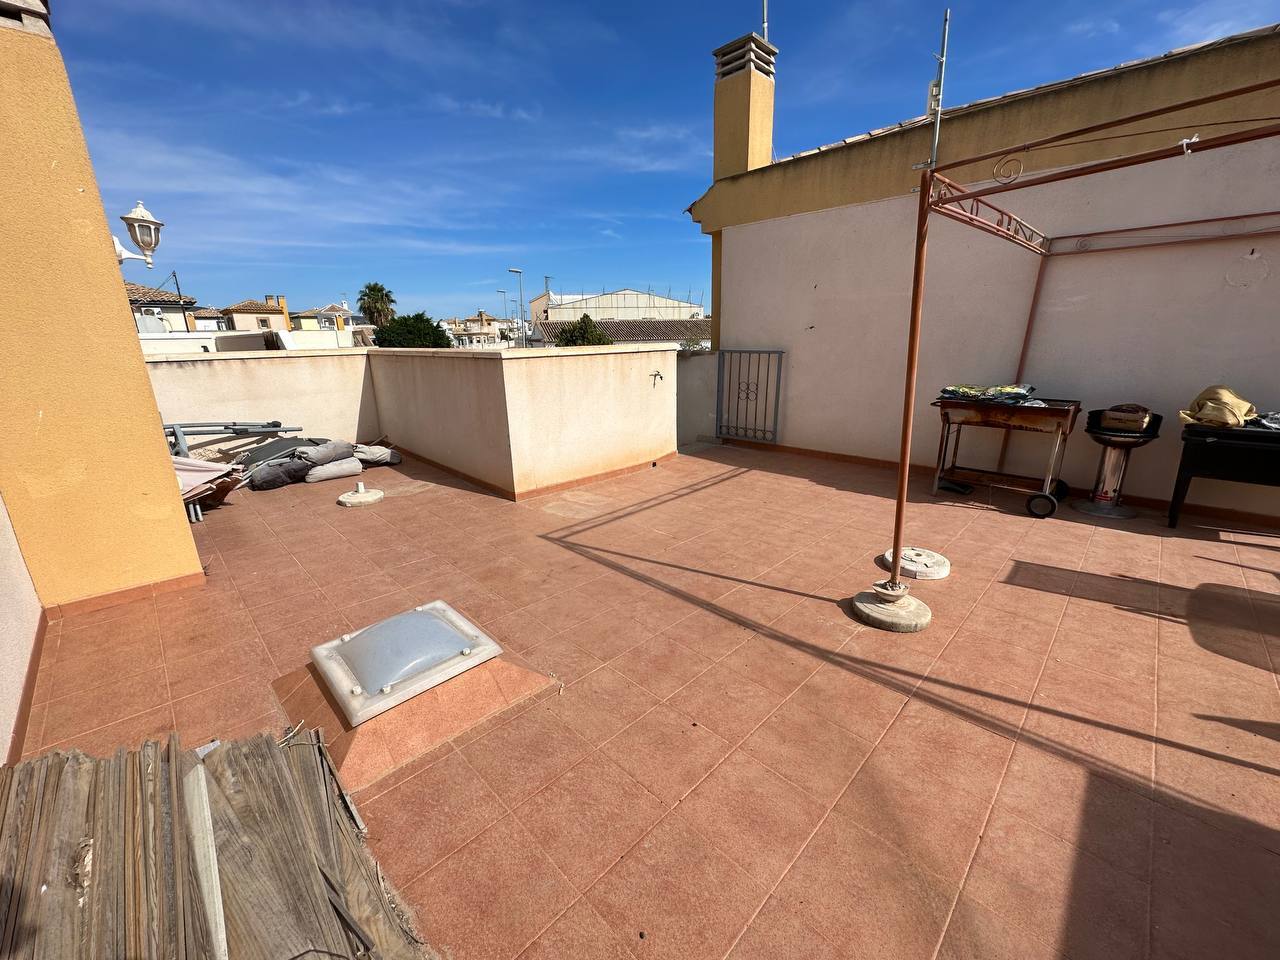 SWDF1790-1-1: Bungalow for sale in Murcia